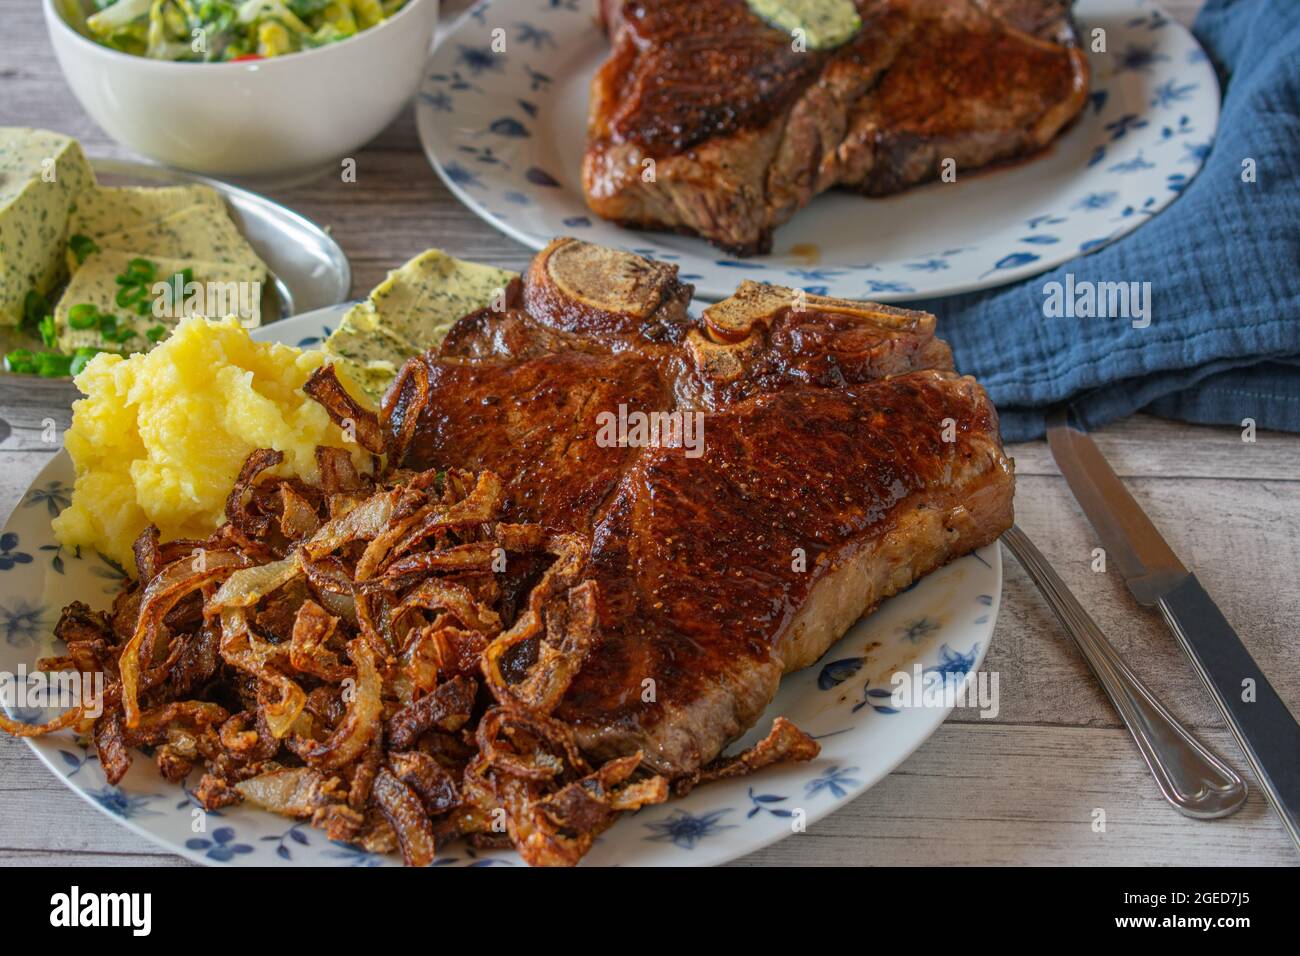 organic and dry aged  irish T-bone or porterhouse steak with deep fried onions, mashed potatoes and salad on a plate Stock Photo